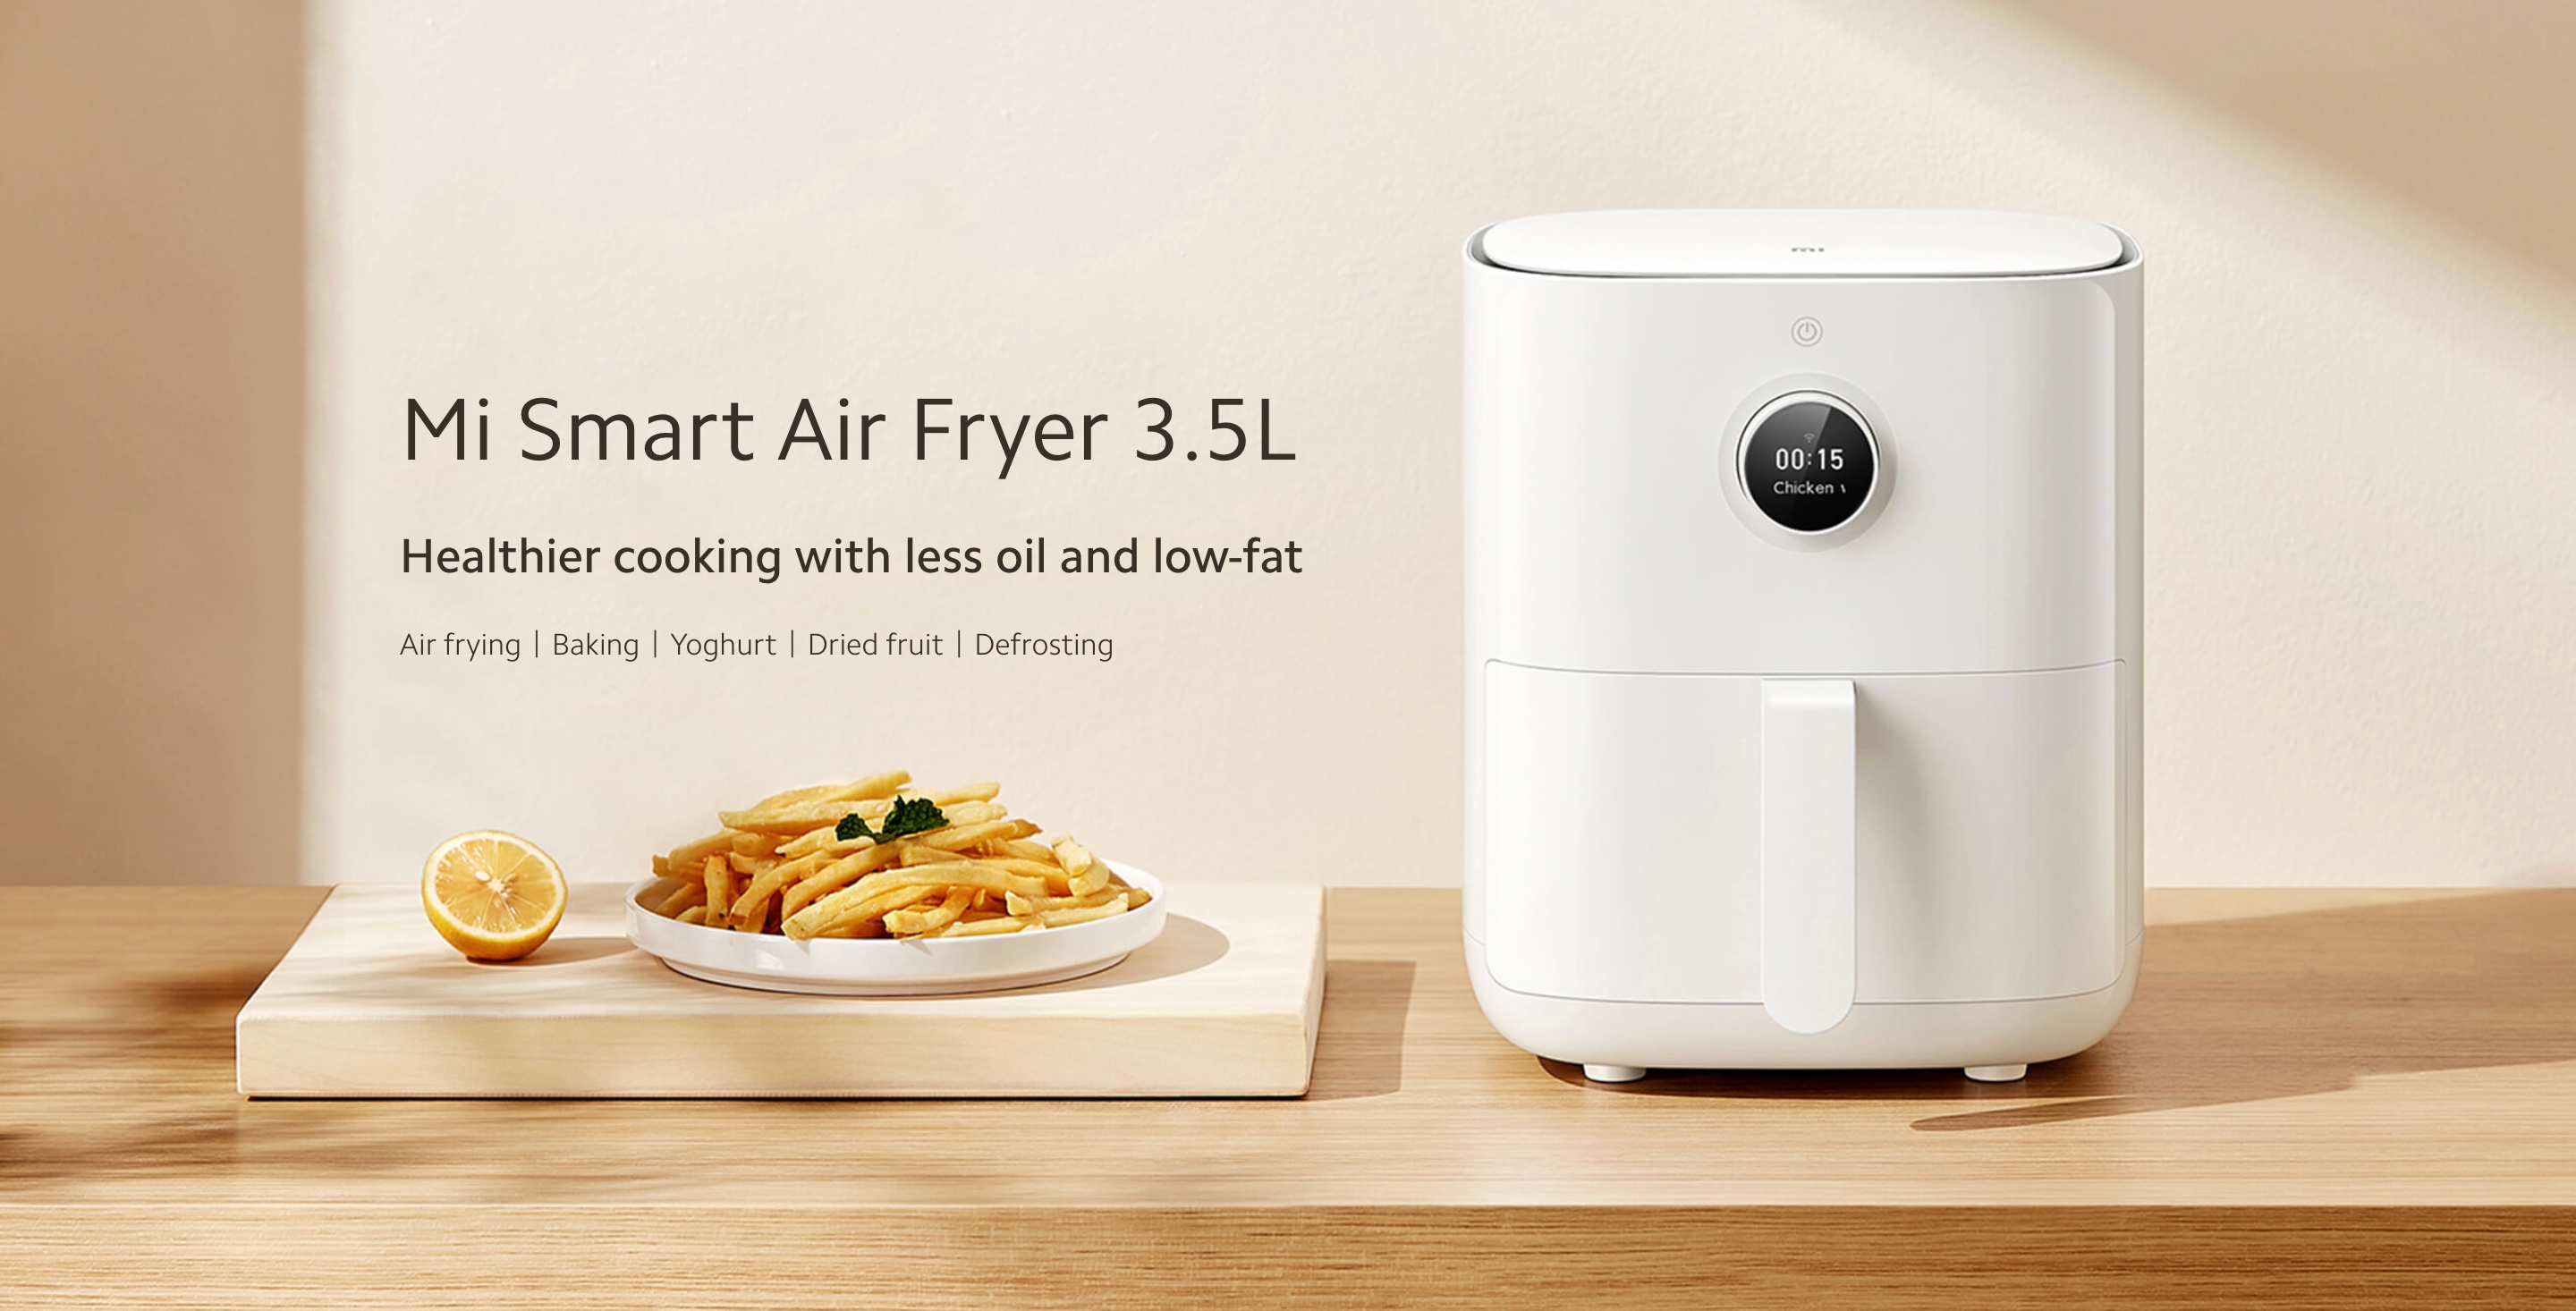 Xiaomi Mi Smart Air Fryer 3.5L: a smart air fryer with Google Assistant and Amazon Alexa support for 99 euros